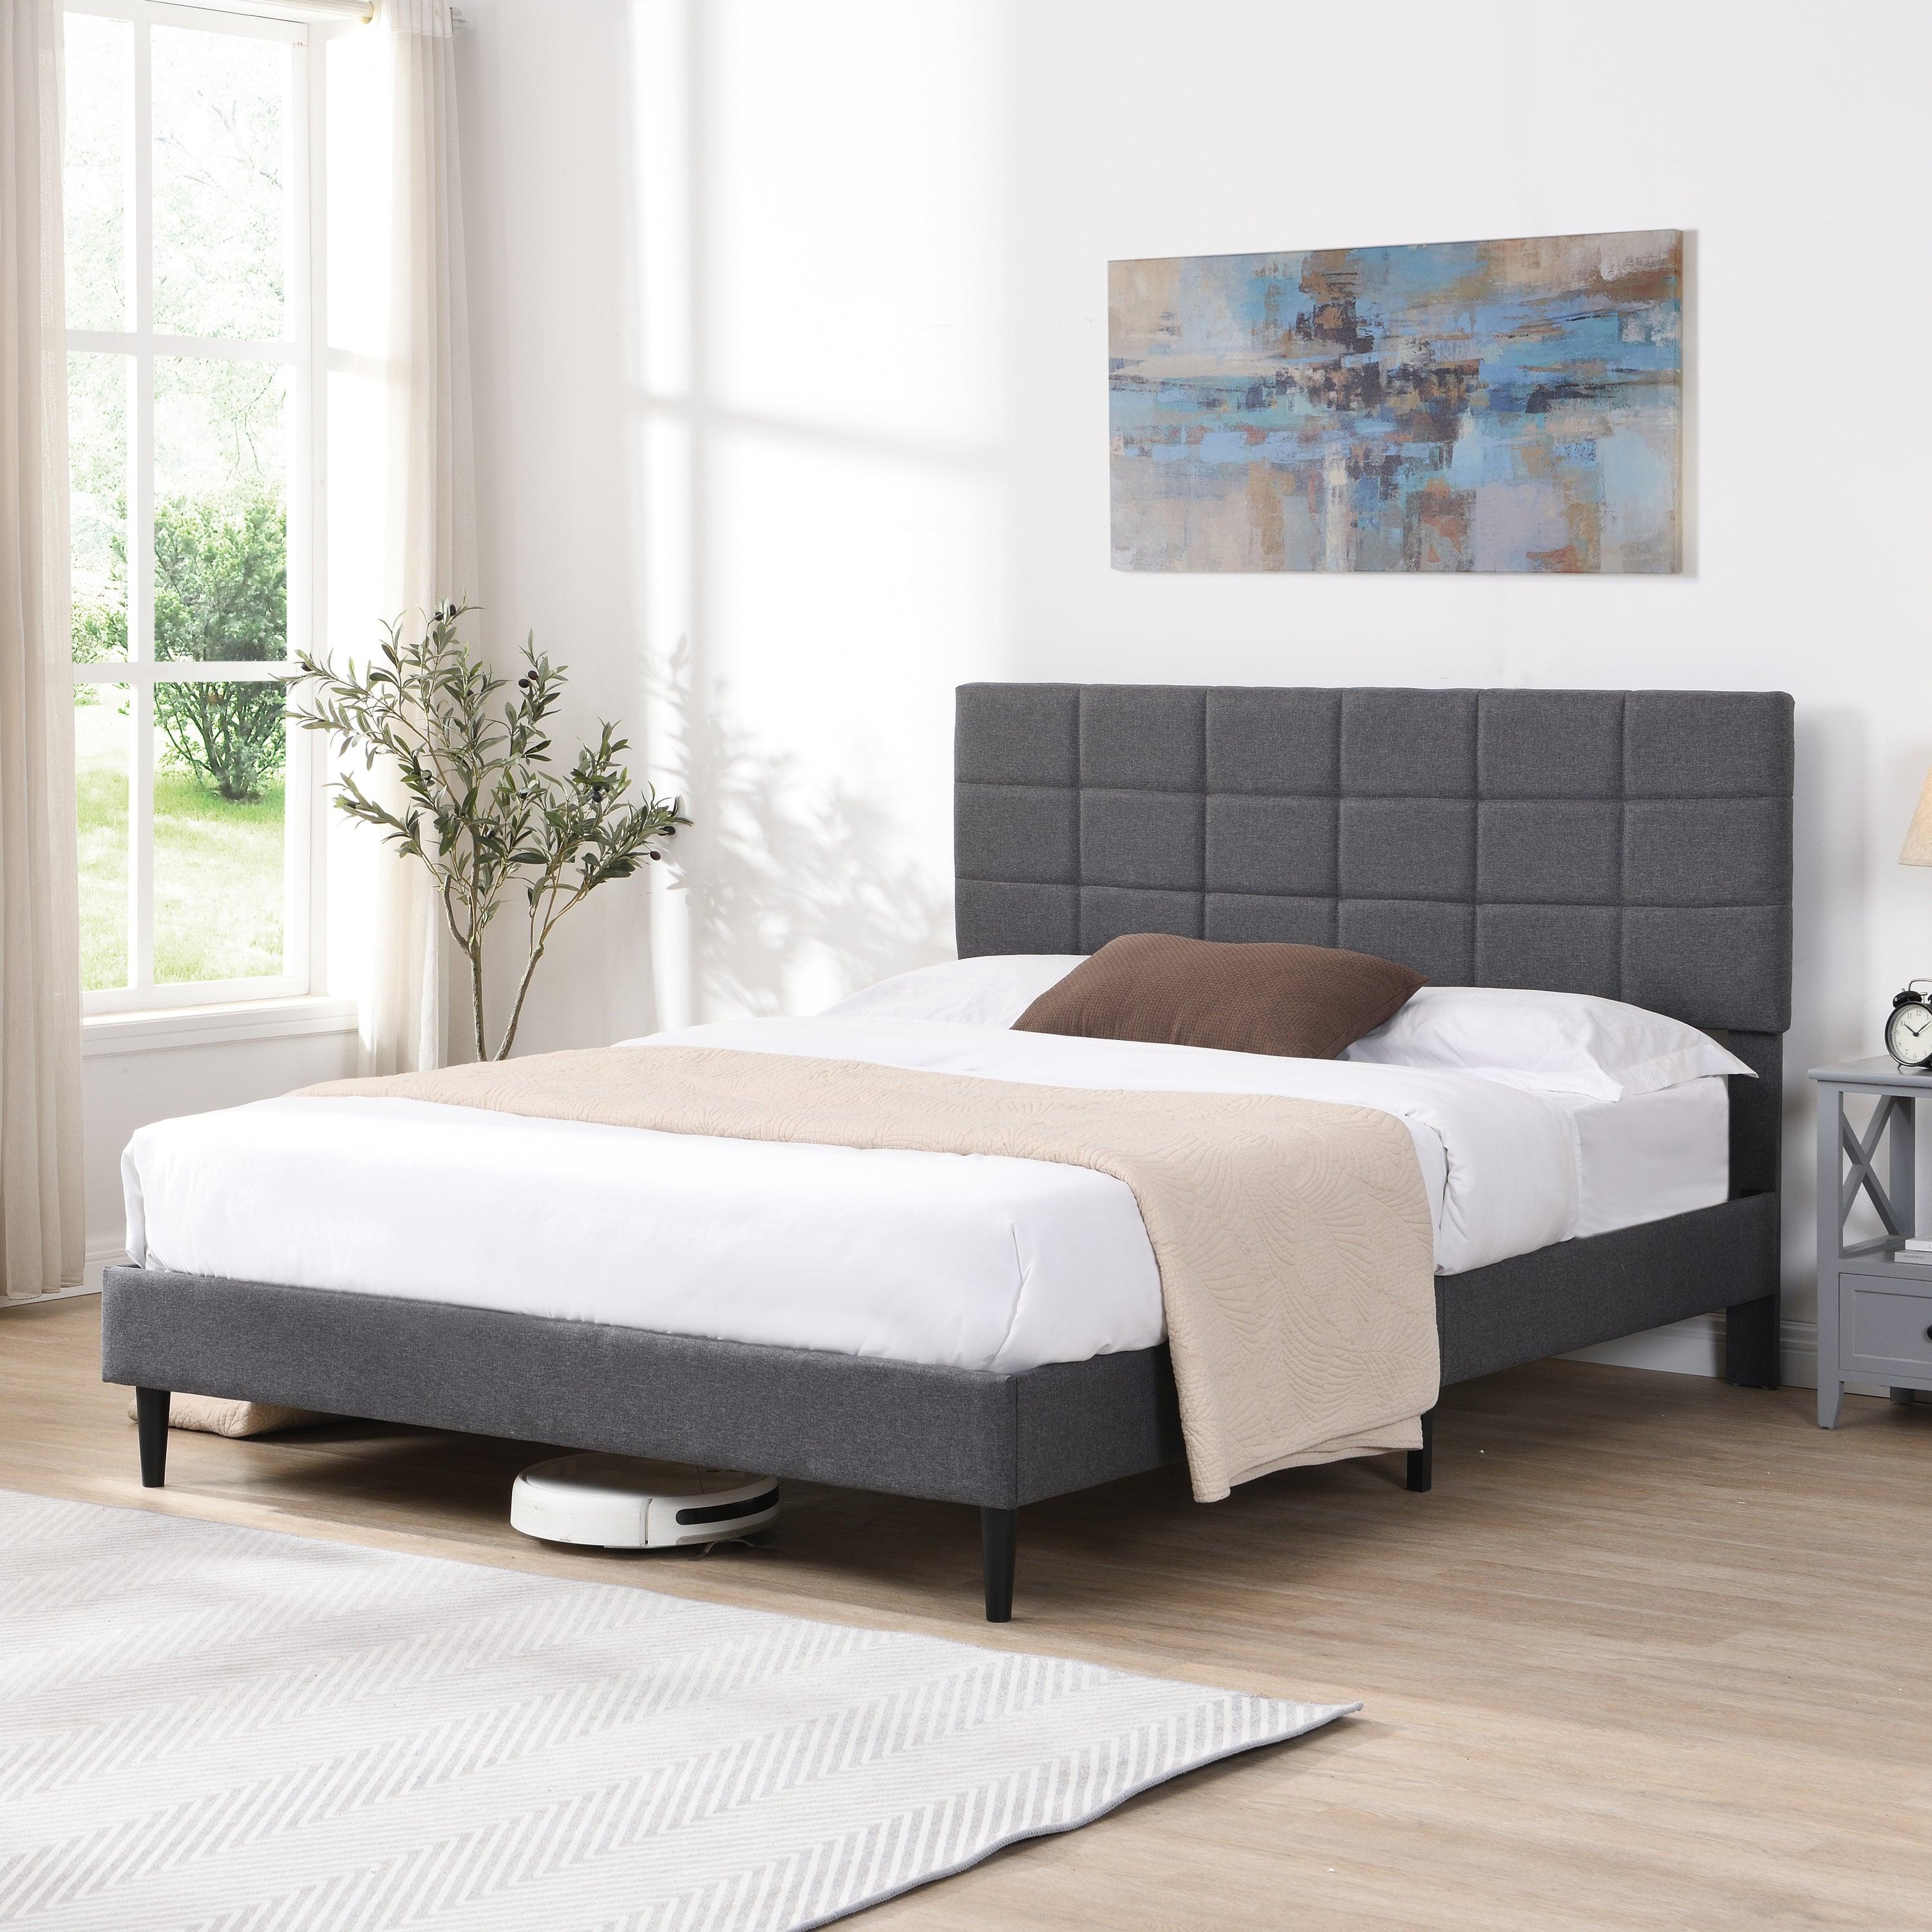 🆓🚛 Queen Size Platform Bed Frame With Fabric Upholstered Headboard & Wooden Slats, No Box Spring Needed/Easy Assembly, Gray